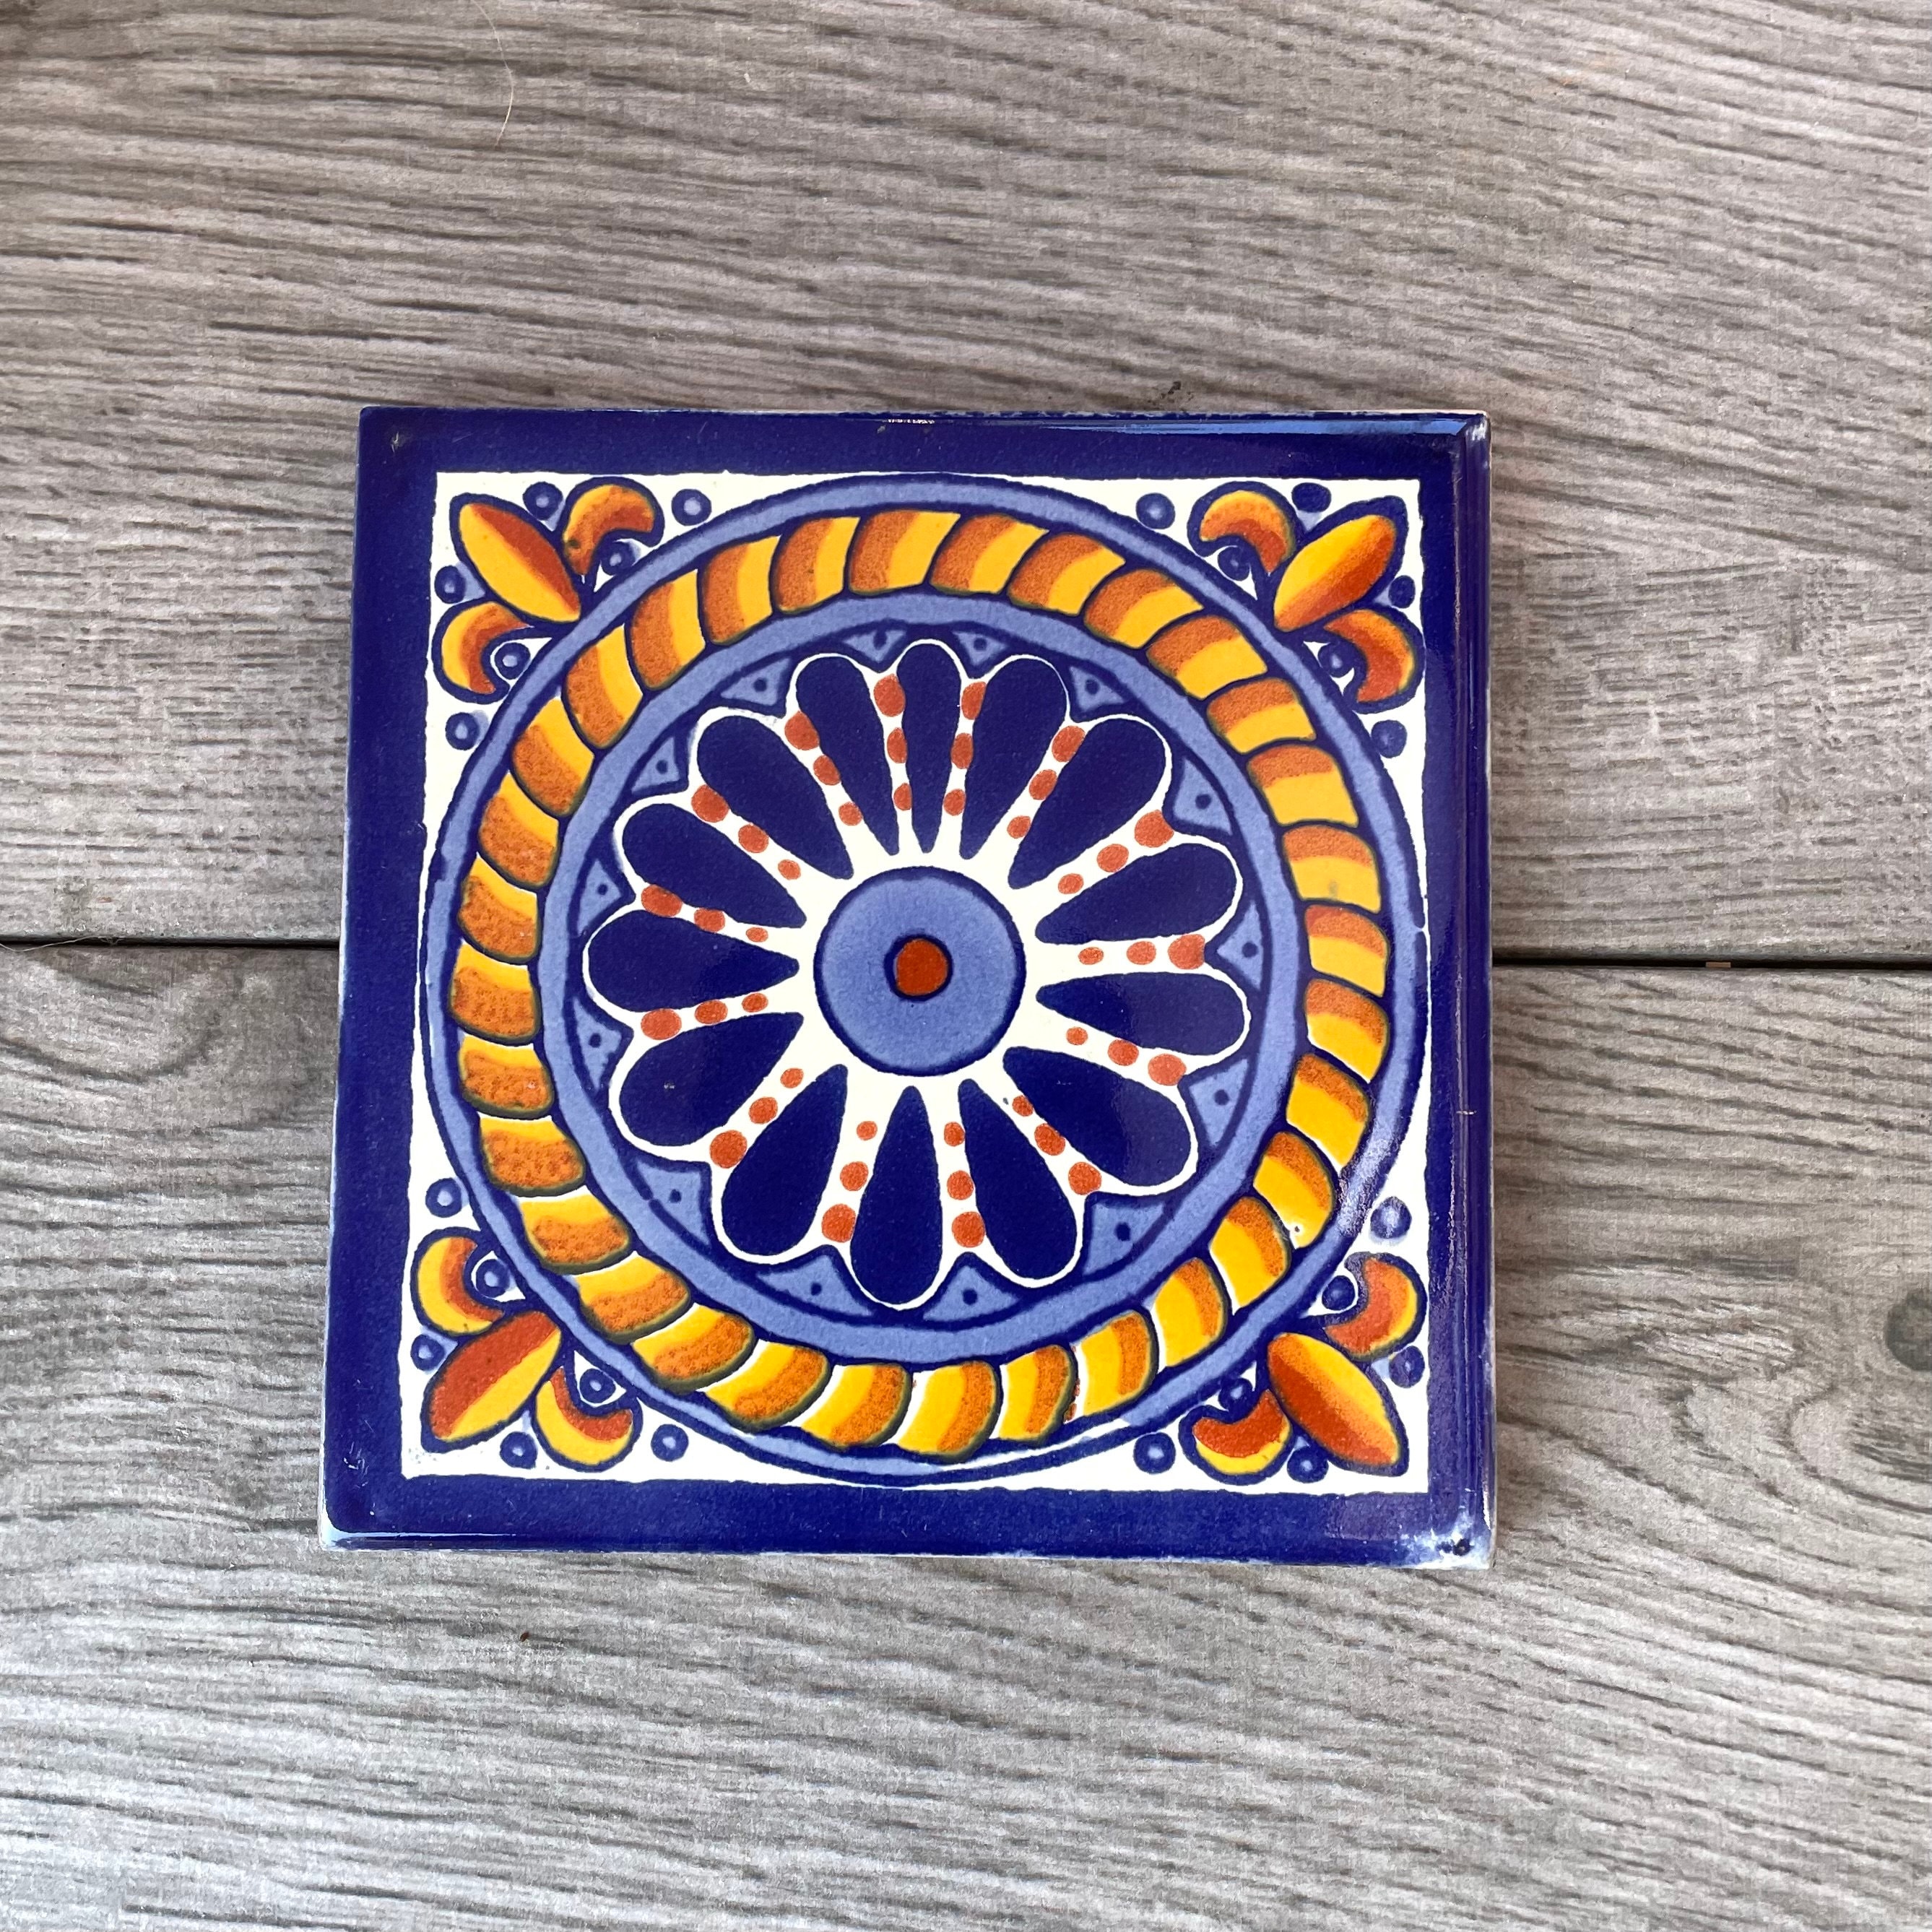 How to Make Coasters Out of Tiles - Koti Beth